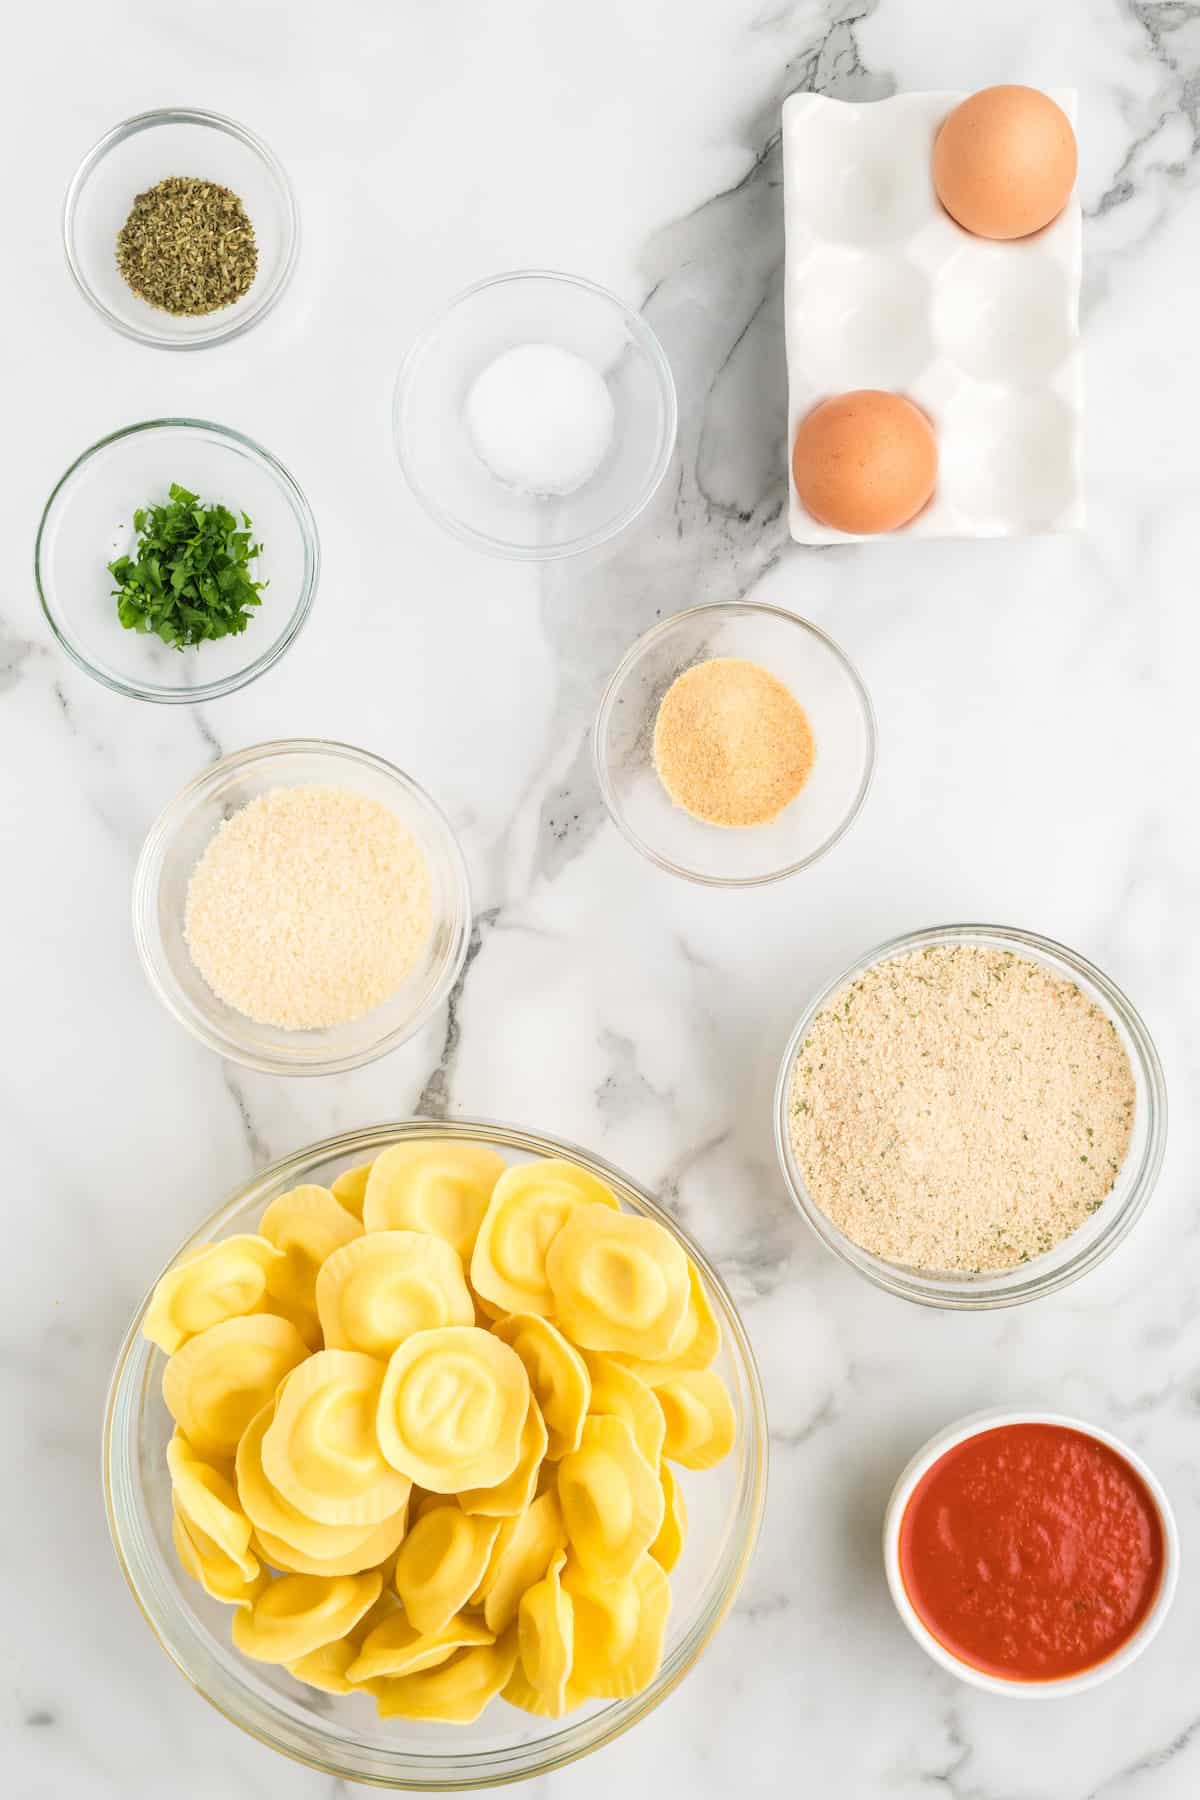 ingredients for the air fryer ravioli in small glass bowls on the countertop.